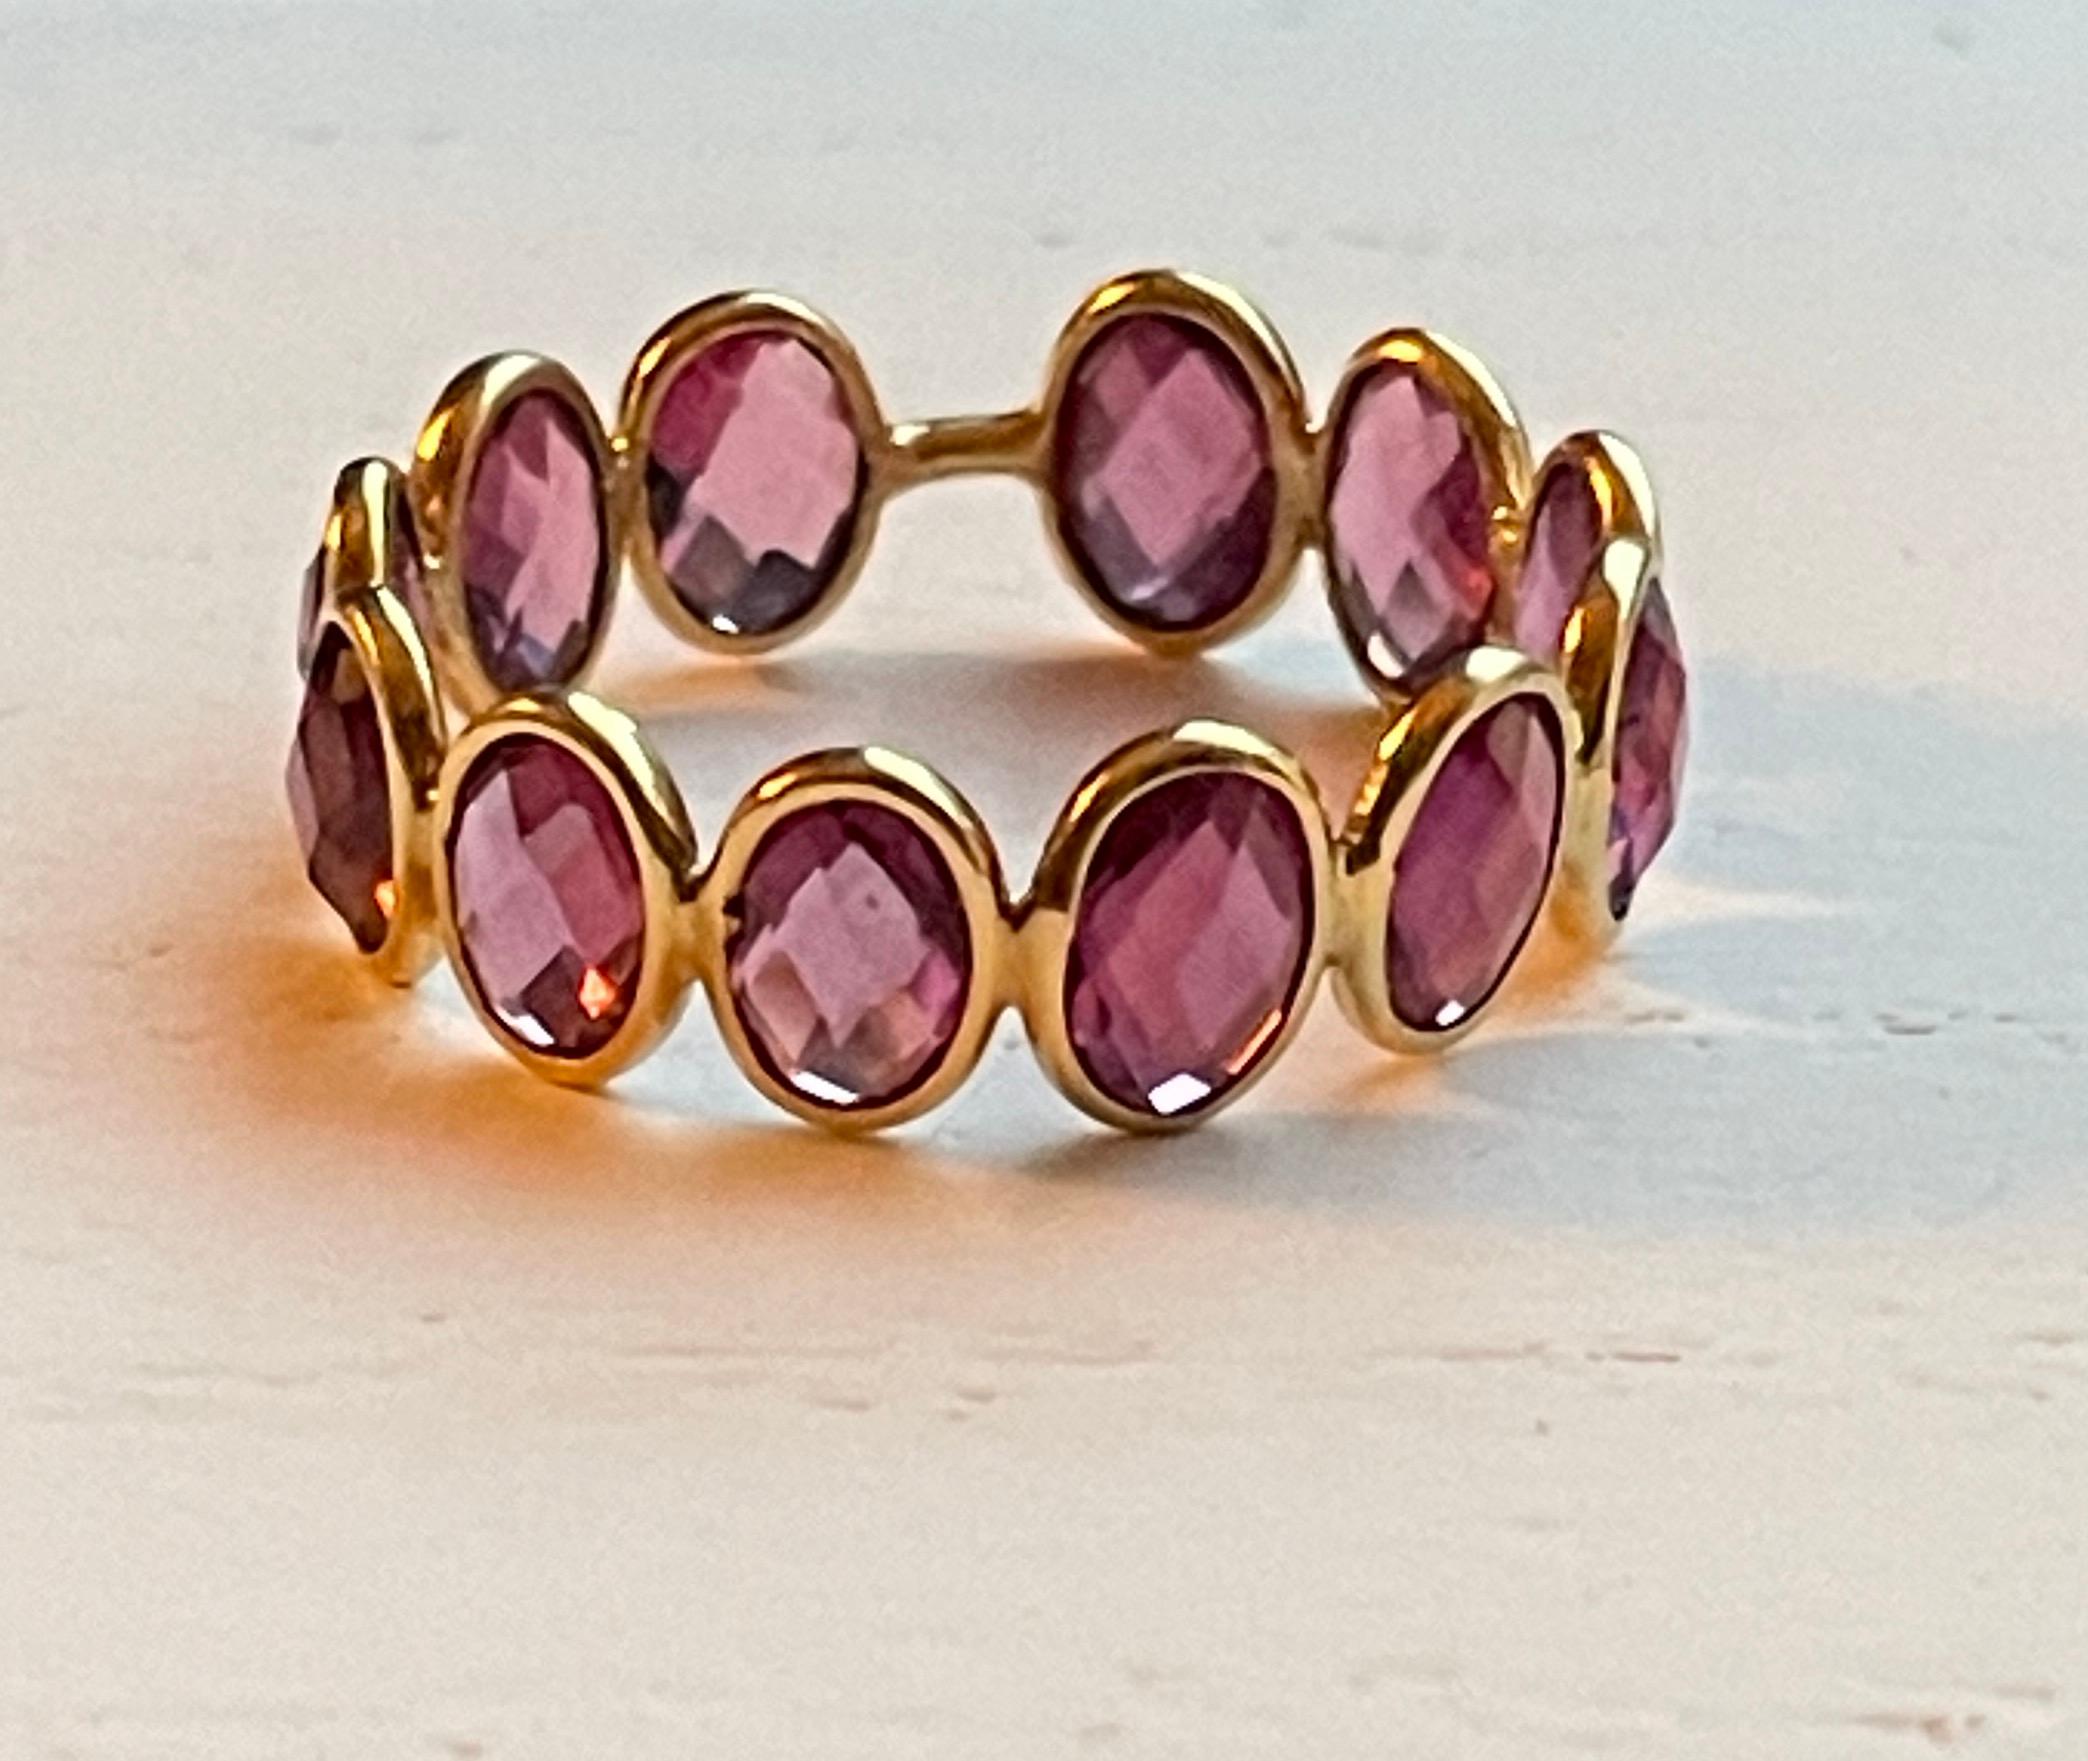 This gorgeous Rhodolite 18K Gold Ring is comprised of 12 checker cut ovals totaling 5.66 carats. The 18K gold bezel setting allows for the stones to showcase maximum shine and sparkle. The Ring is size 7. All stones are ethically sourced and hand